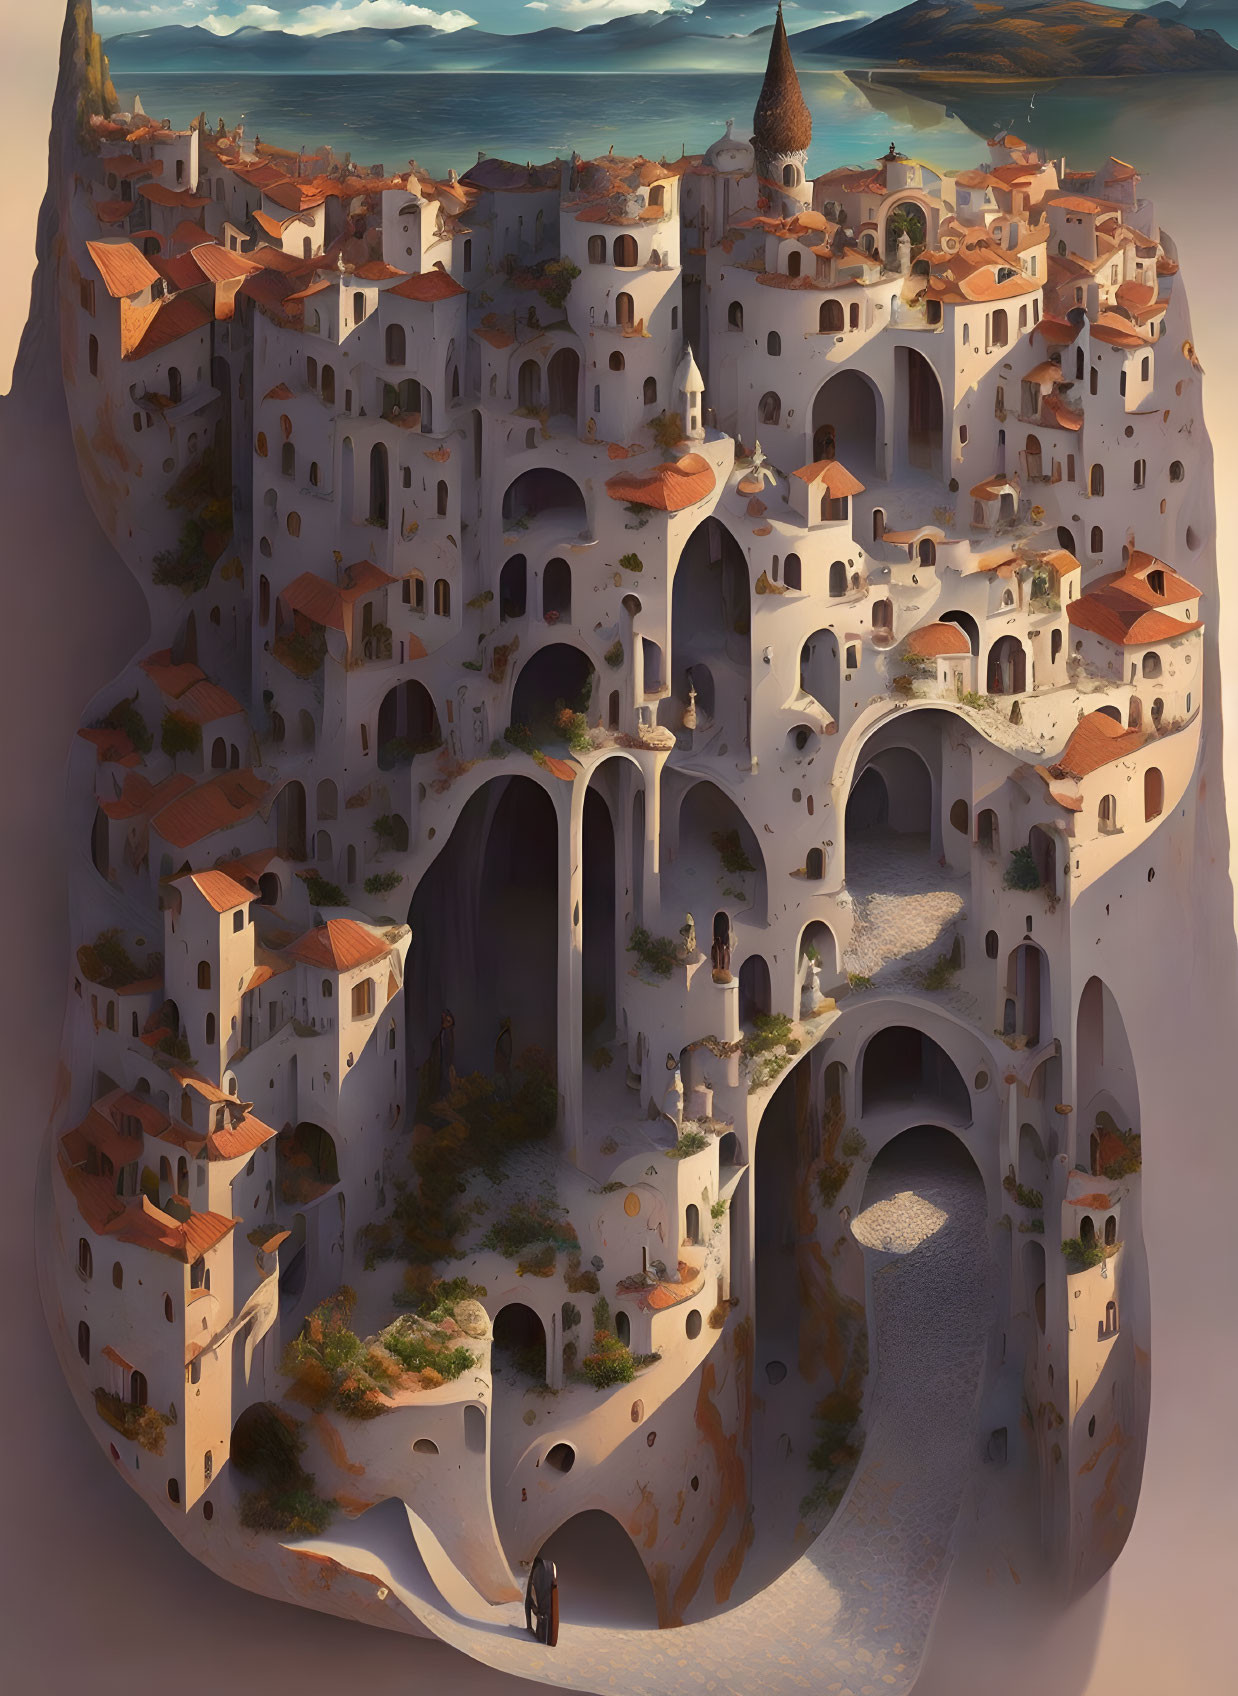 Vertical City with Arches & Buildings on Rock Formation under Warm Sky